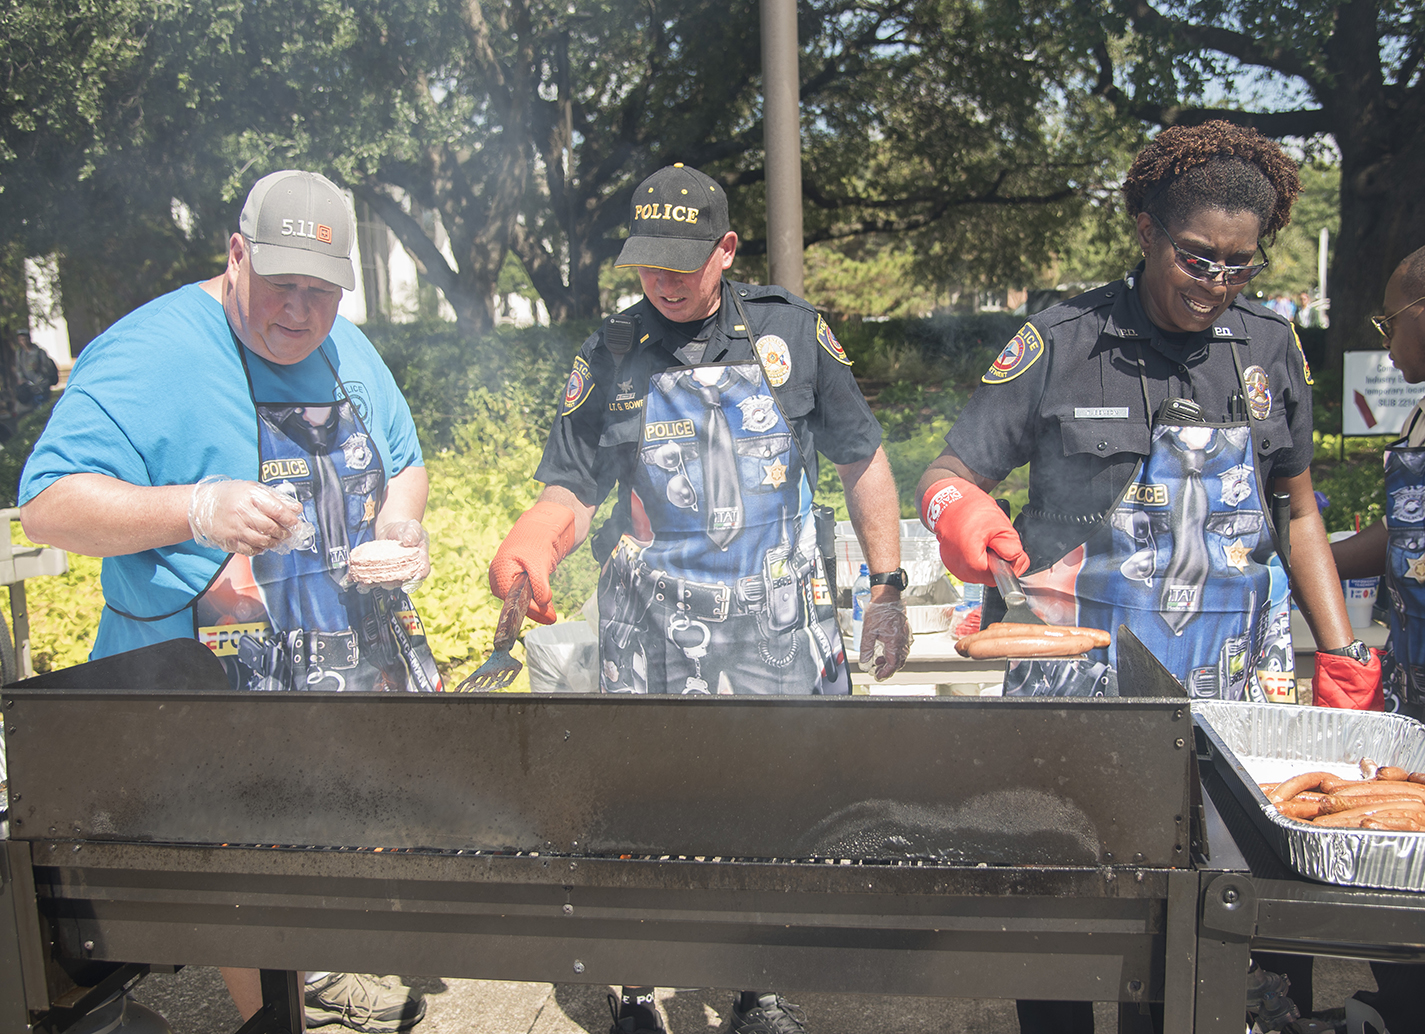 TCC police Cpl. David Luttrell, Lt. Greg Bowen and Officer Teresa Benson cook hot dogs and hamburgers for students during the annual Cookout with the Cops on South Campus Oct. 5.